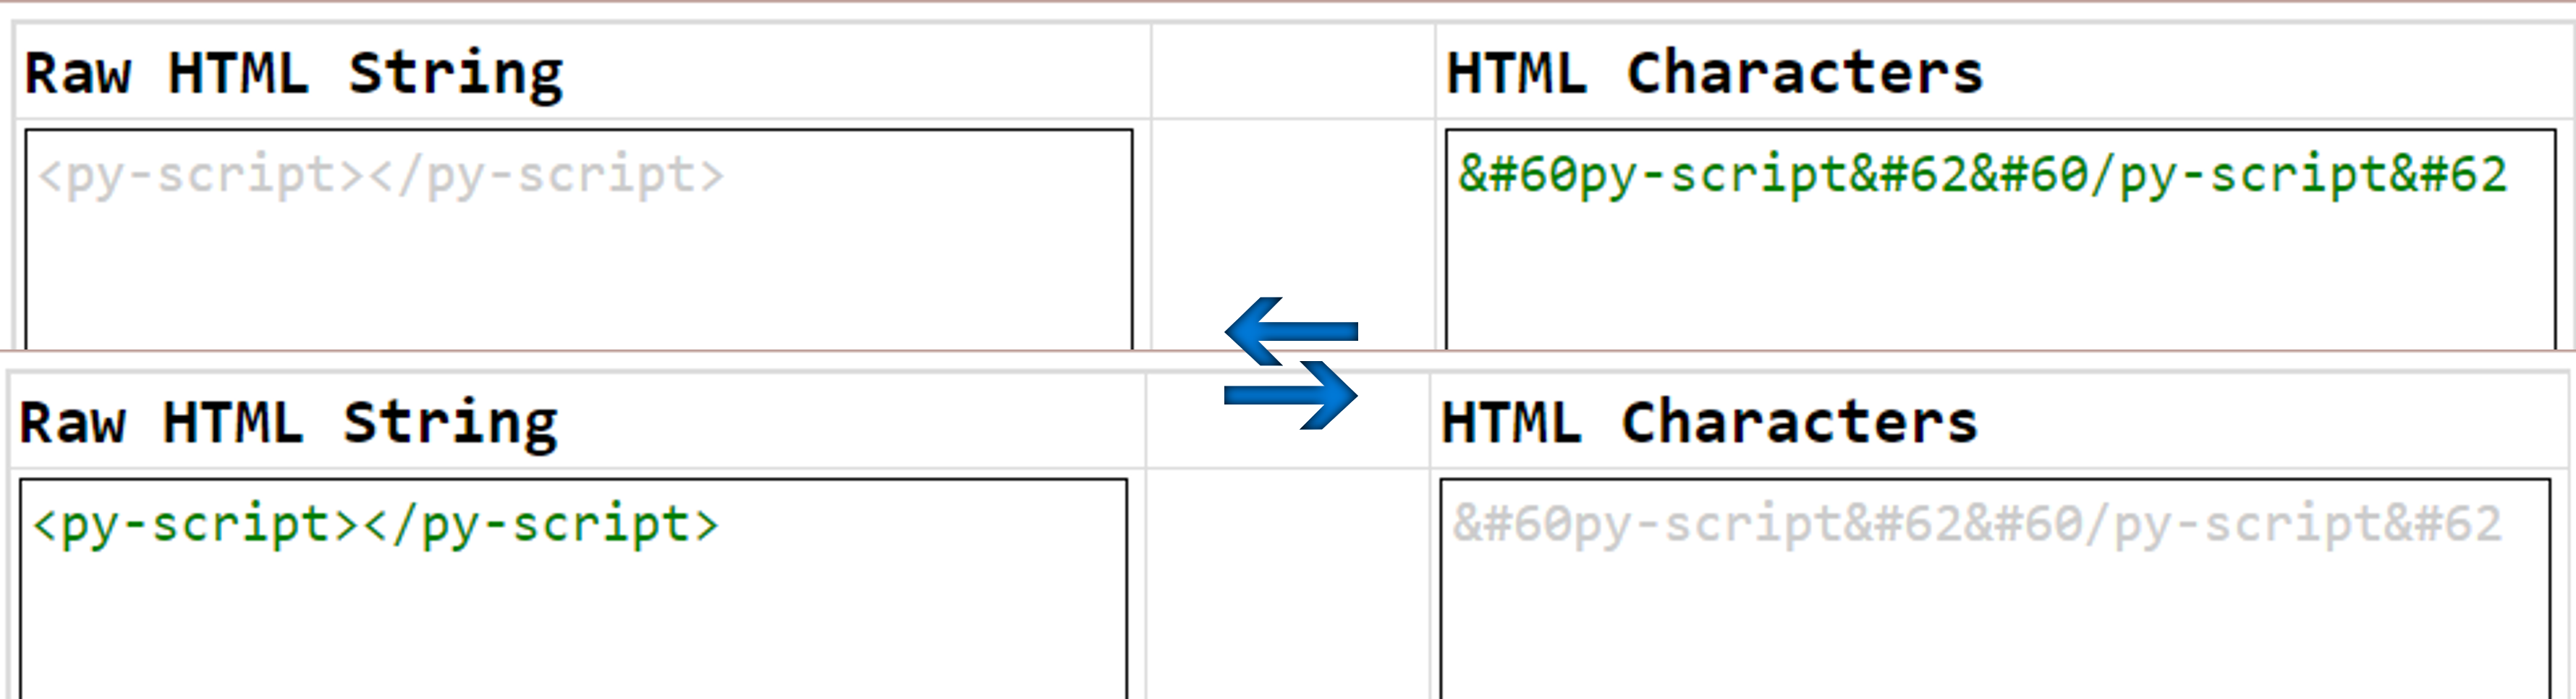 Image by Author | Showcases the raw html string <py-script></py-script> transformed into unicode characters <py-script></py-script> and vice-versa